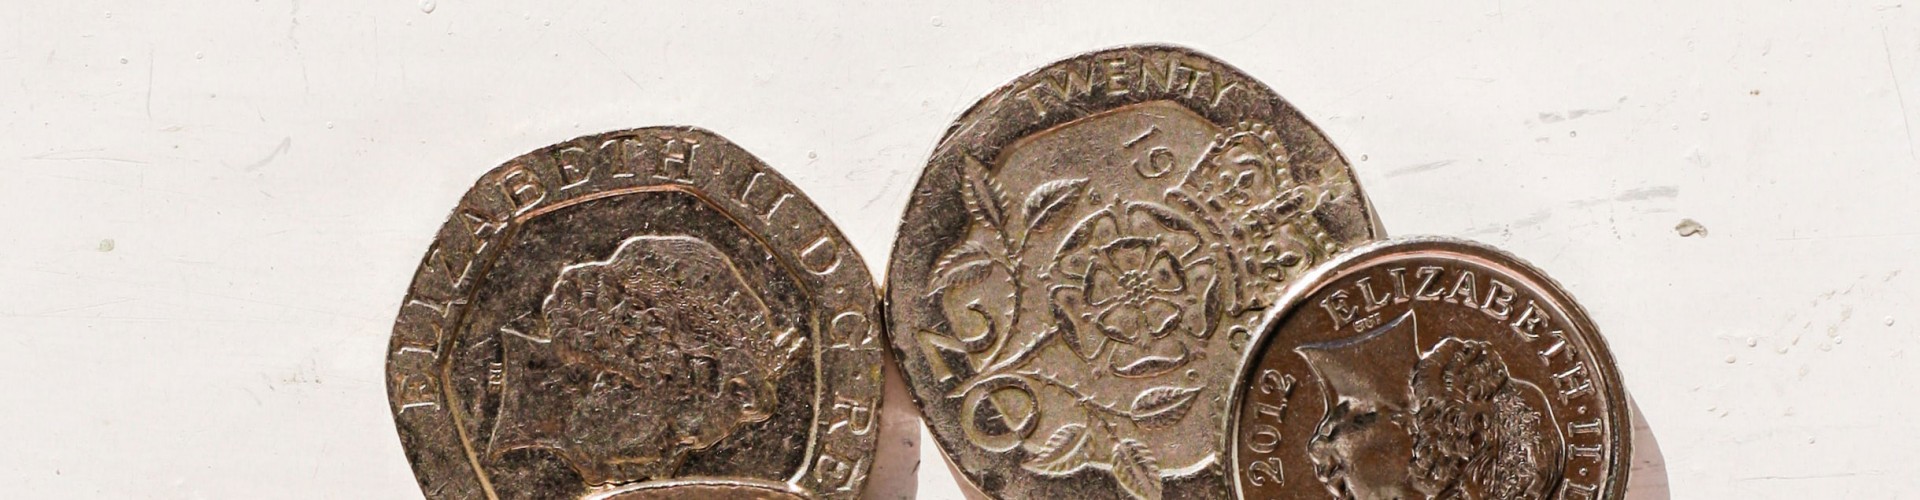 Image of uk coins